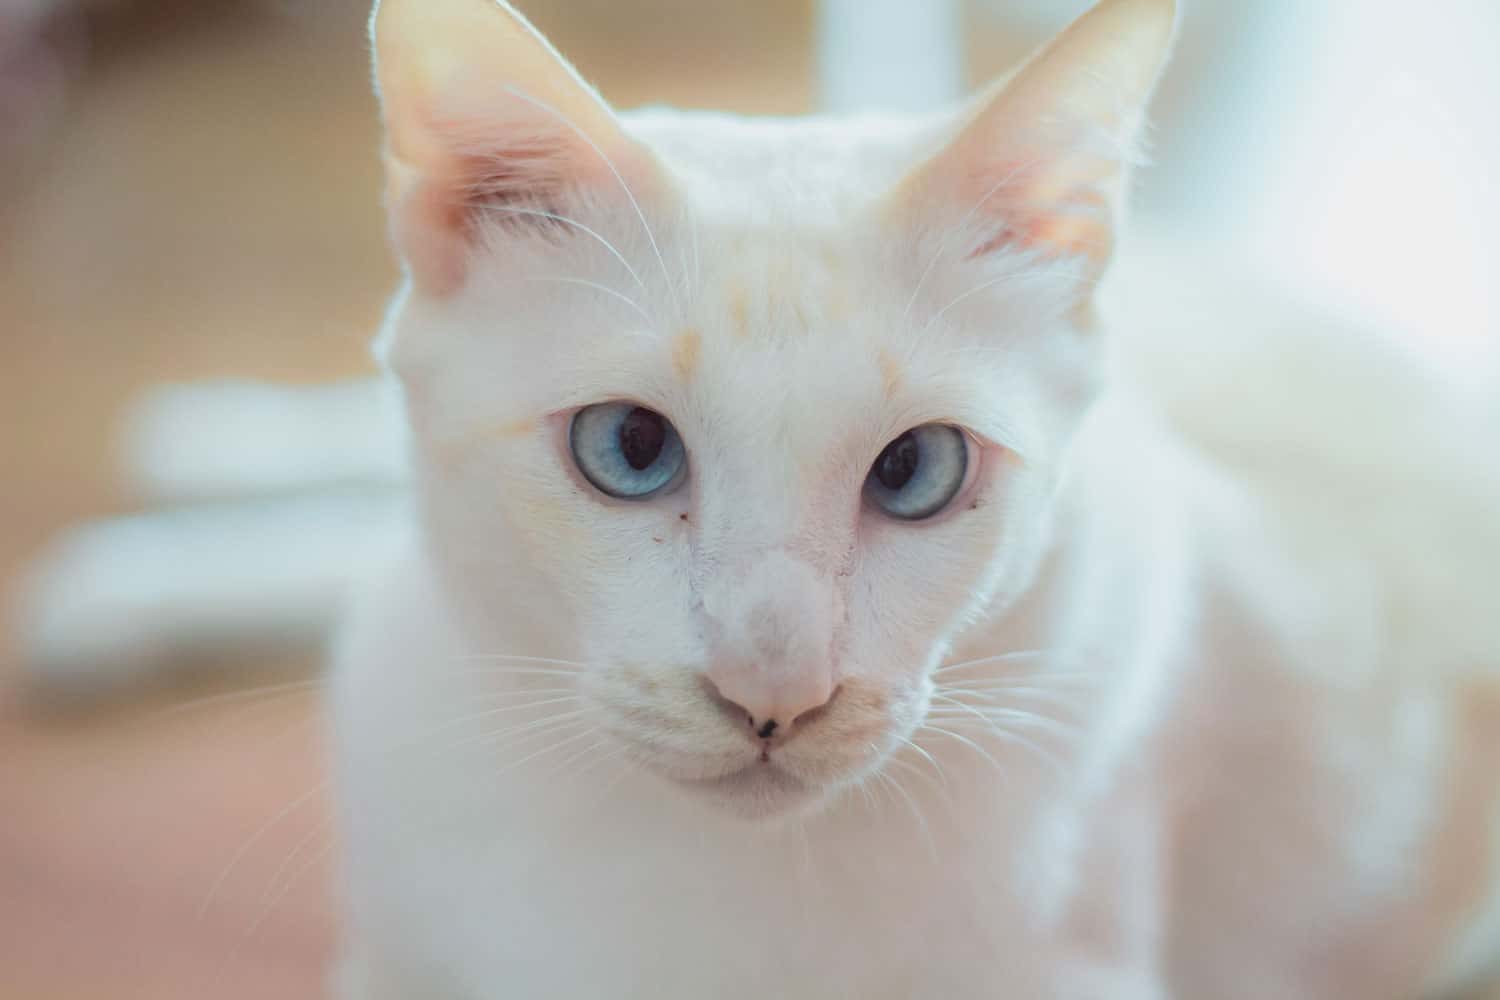 This is a white cat down syndrome. It must be in the home to go out, but it is very lovely.
